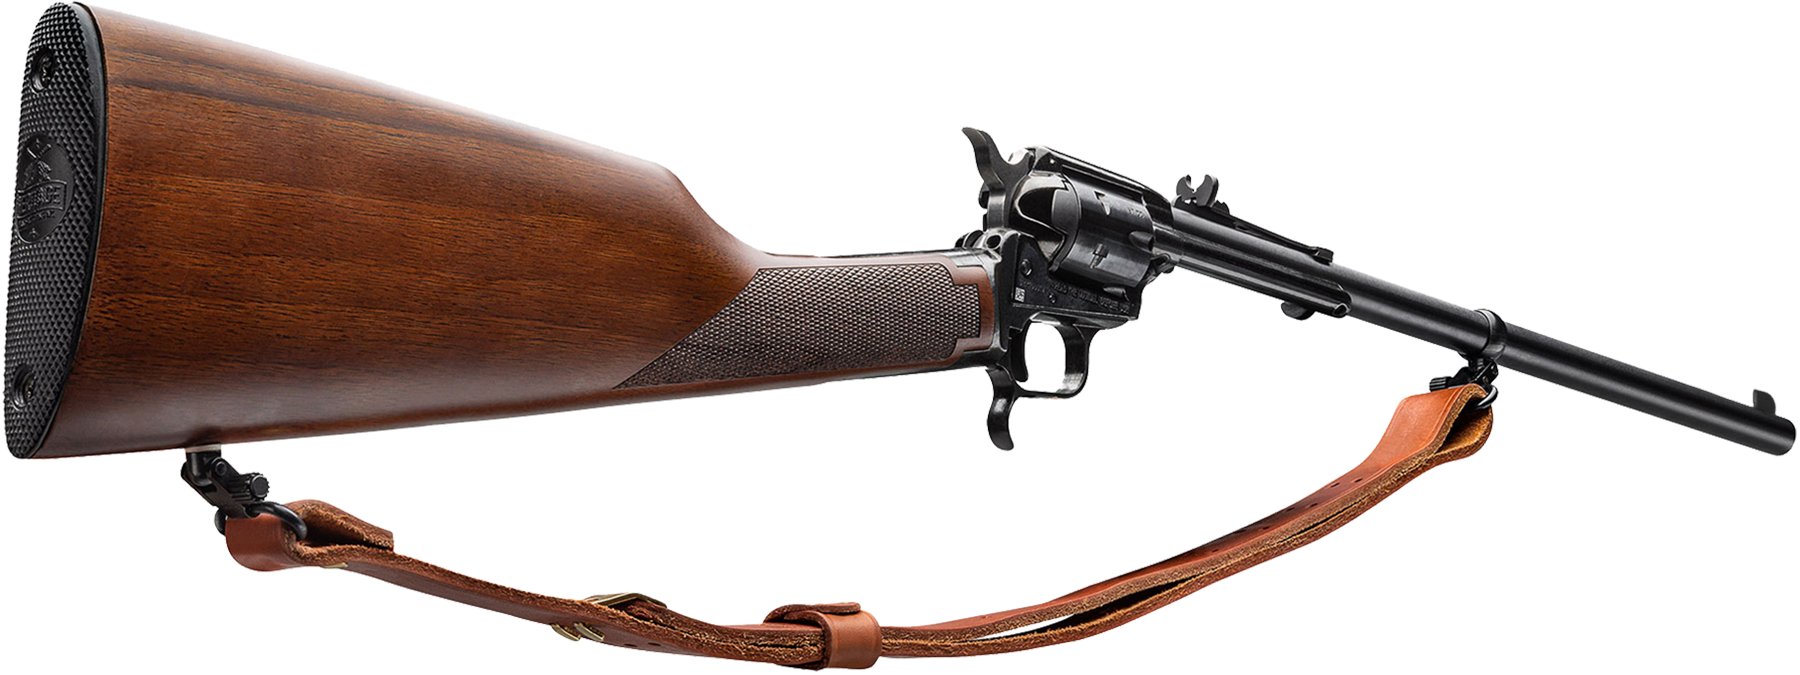 Rough Rider® Rancher™ Carbine 22 LR Black 16” Barrel 6 Rounds Walnut Stock, Buckhorn Sight and Leather Sling